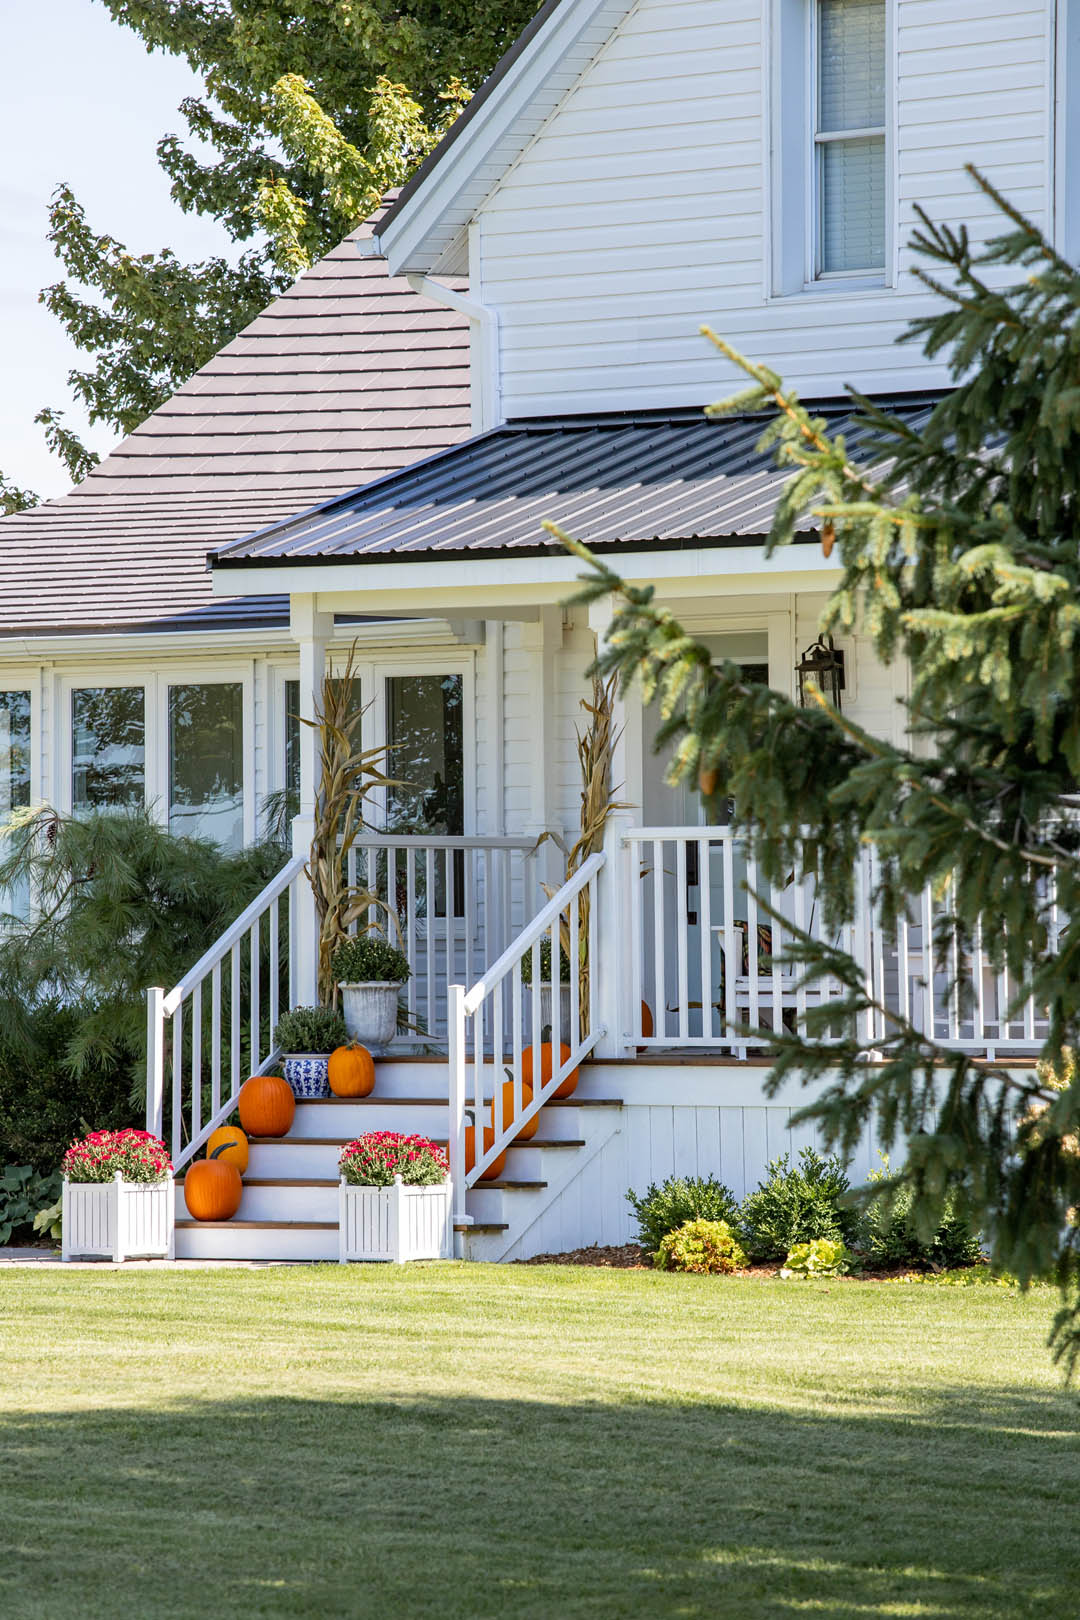 Fall weather is here! In today's post we'll share how we've decorated our classic farmhouse fall front porch this year with brightly coloured mums and cheerful orange pumpkins.